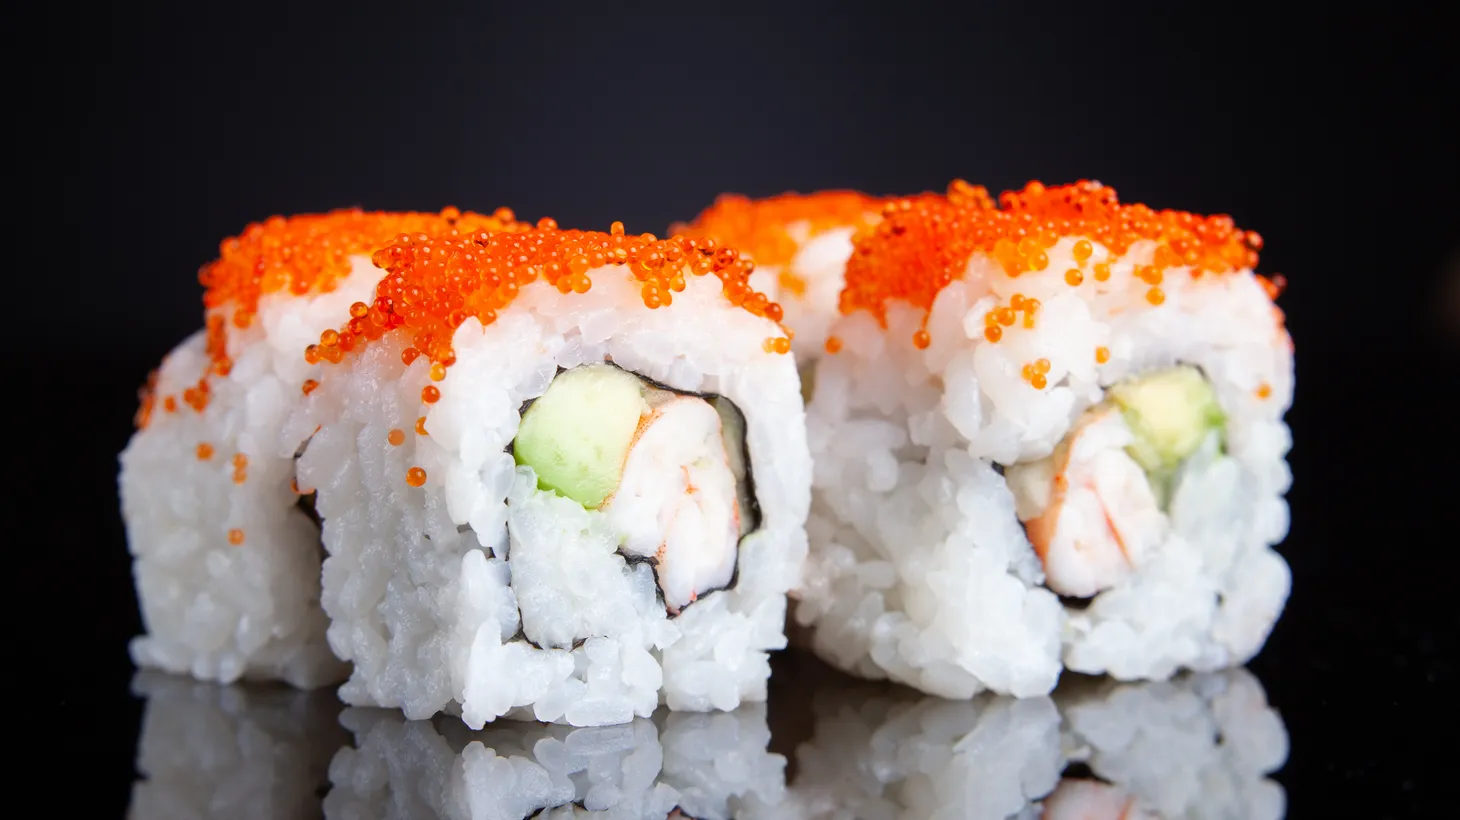 The California roll was supposedly invented at Tokyo Kaikan, one of the first sushi bars in Los Angeles.